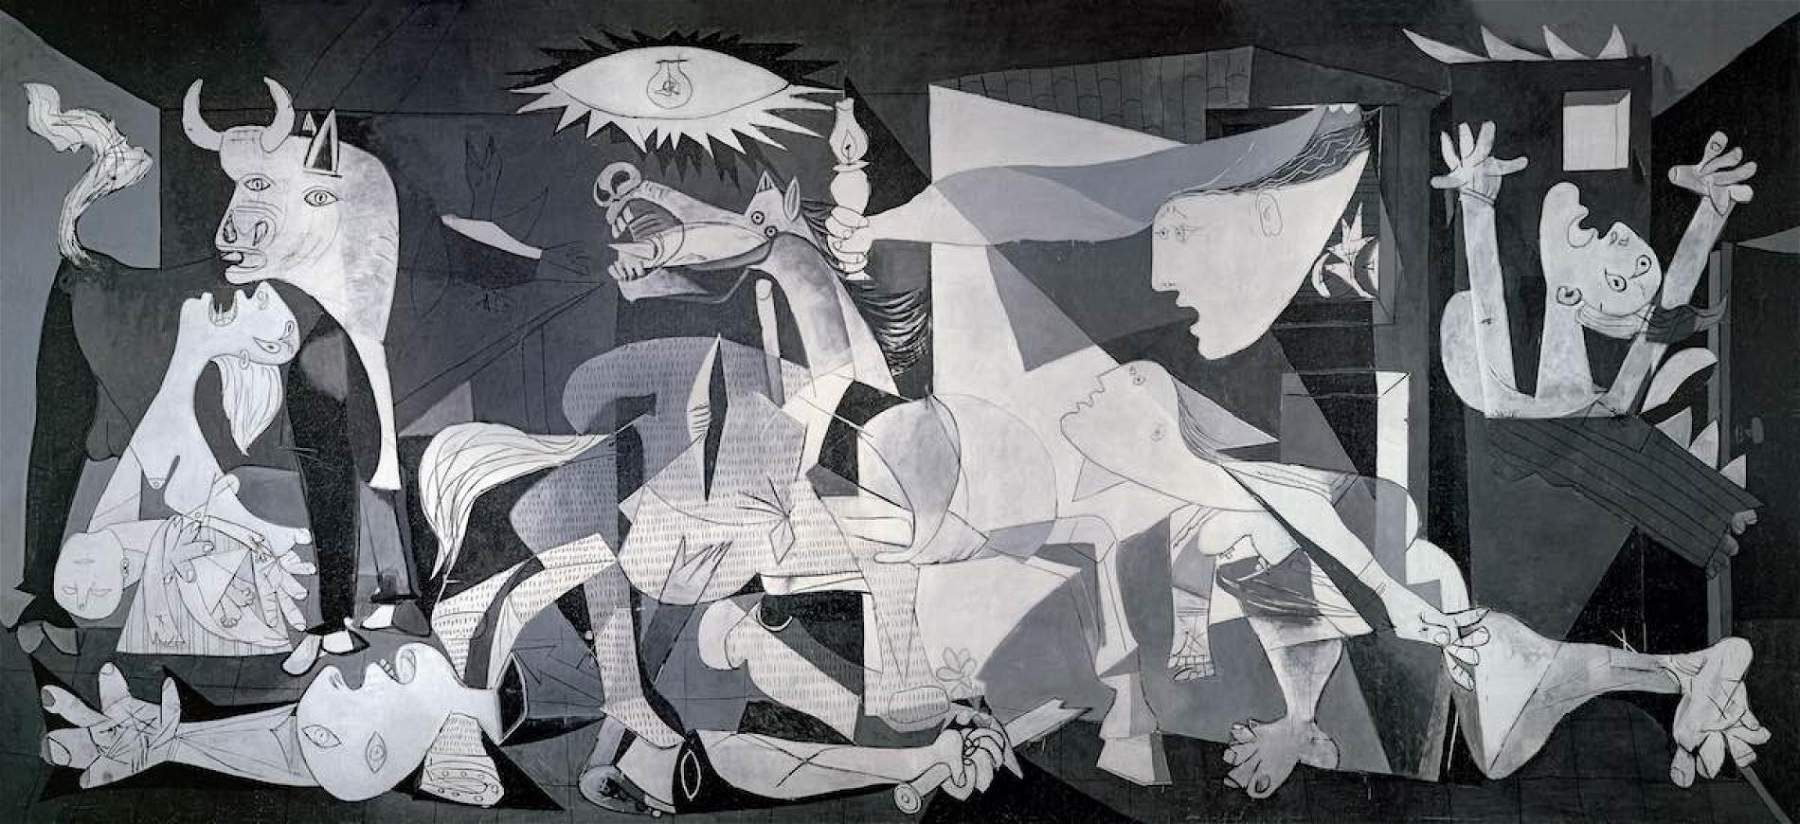 Sabotage at Guernica: this is the plot of the latest chapter in PÃ©rez-Reverte's spy saga